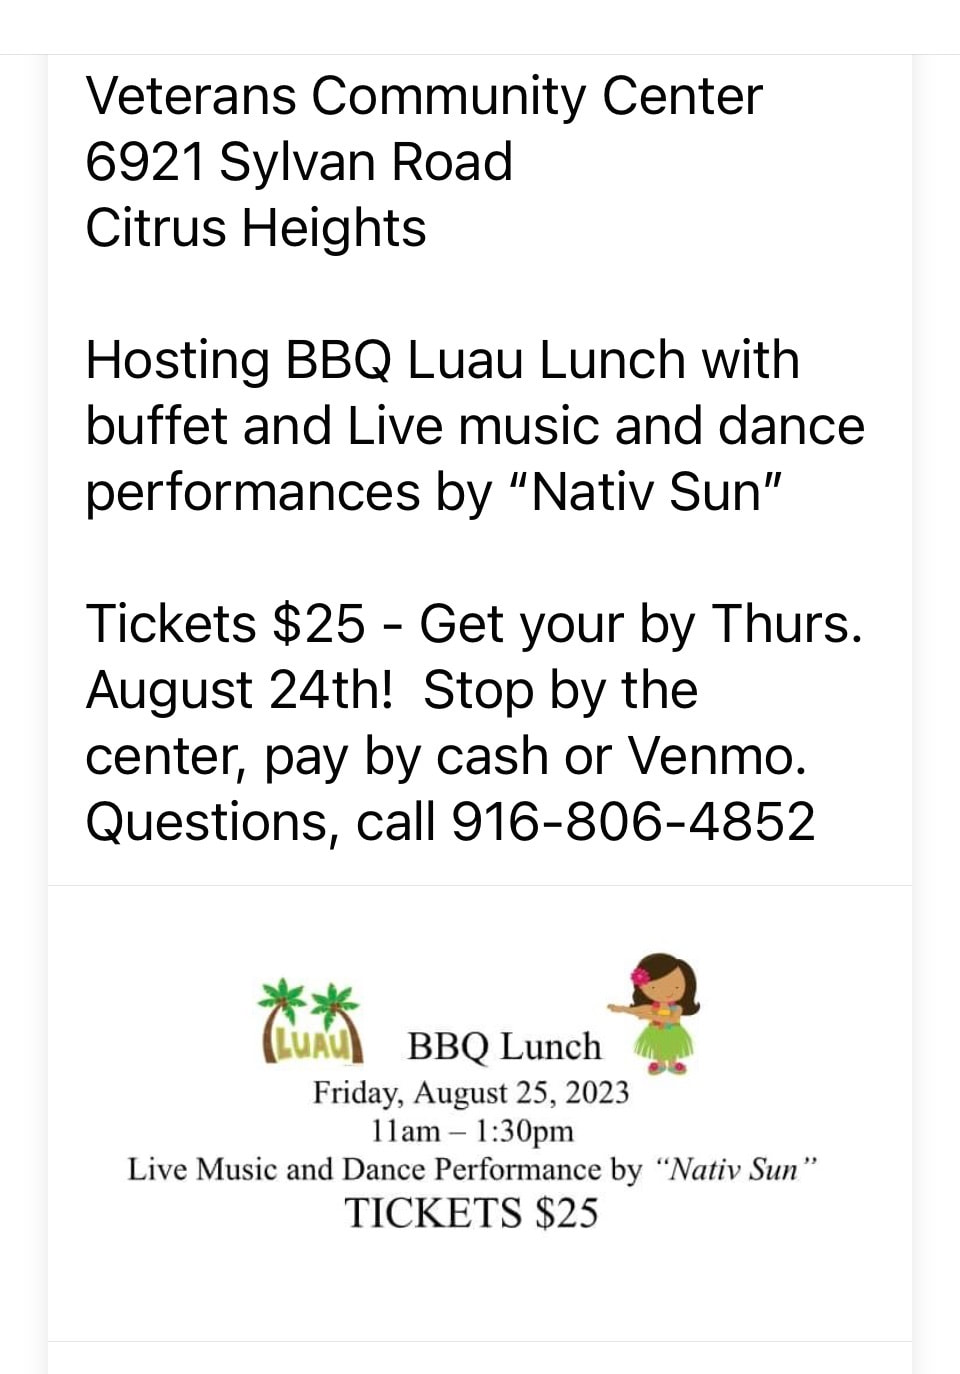 2023 Luau Lunch Flyer for Veterans Community Center, Citrus Heights, CA